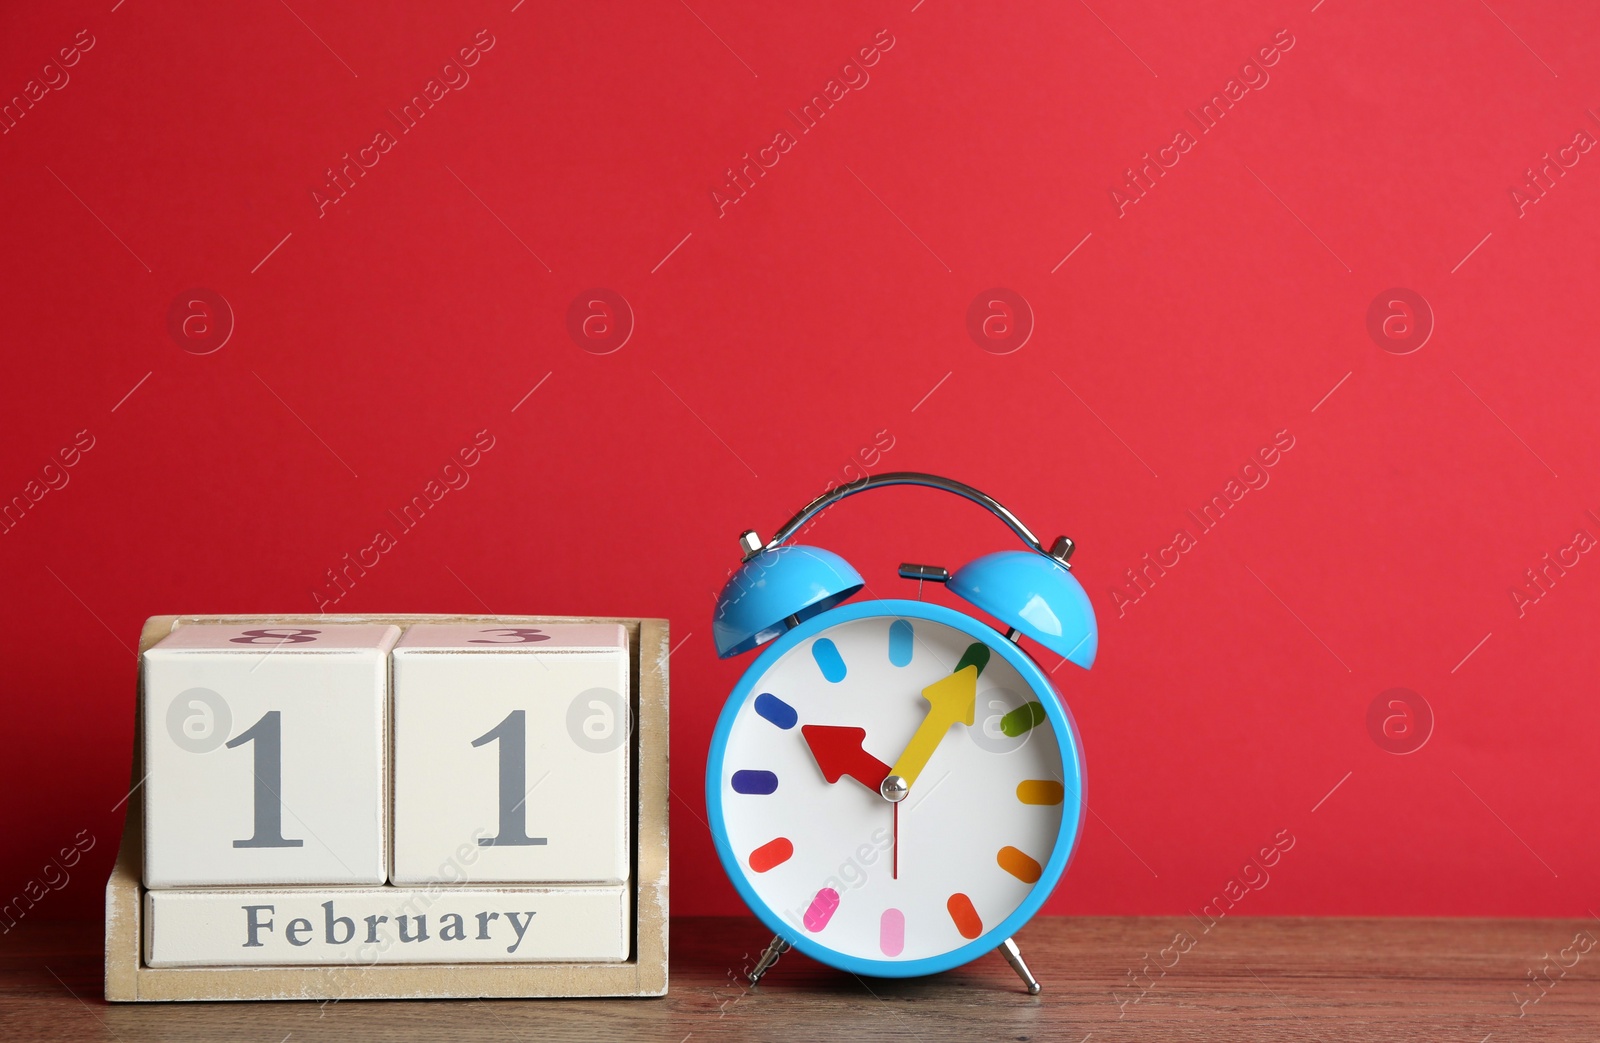 Photo of Wooden block calendar and alarm clock on table against red background